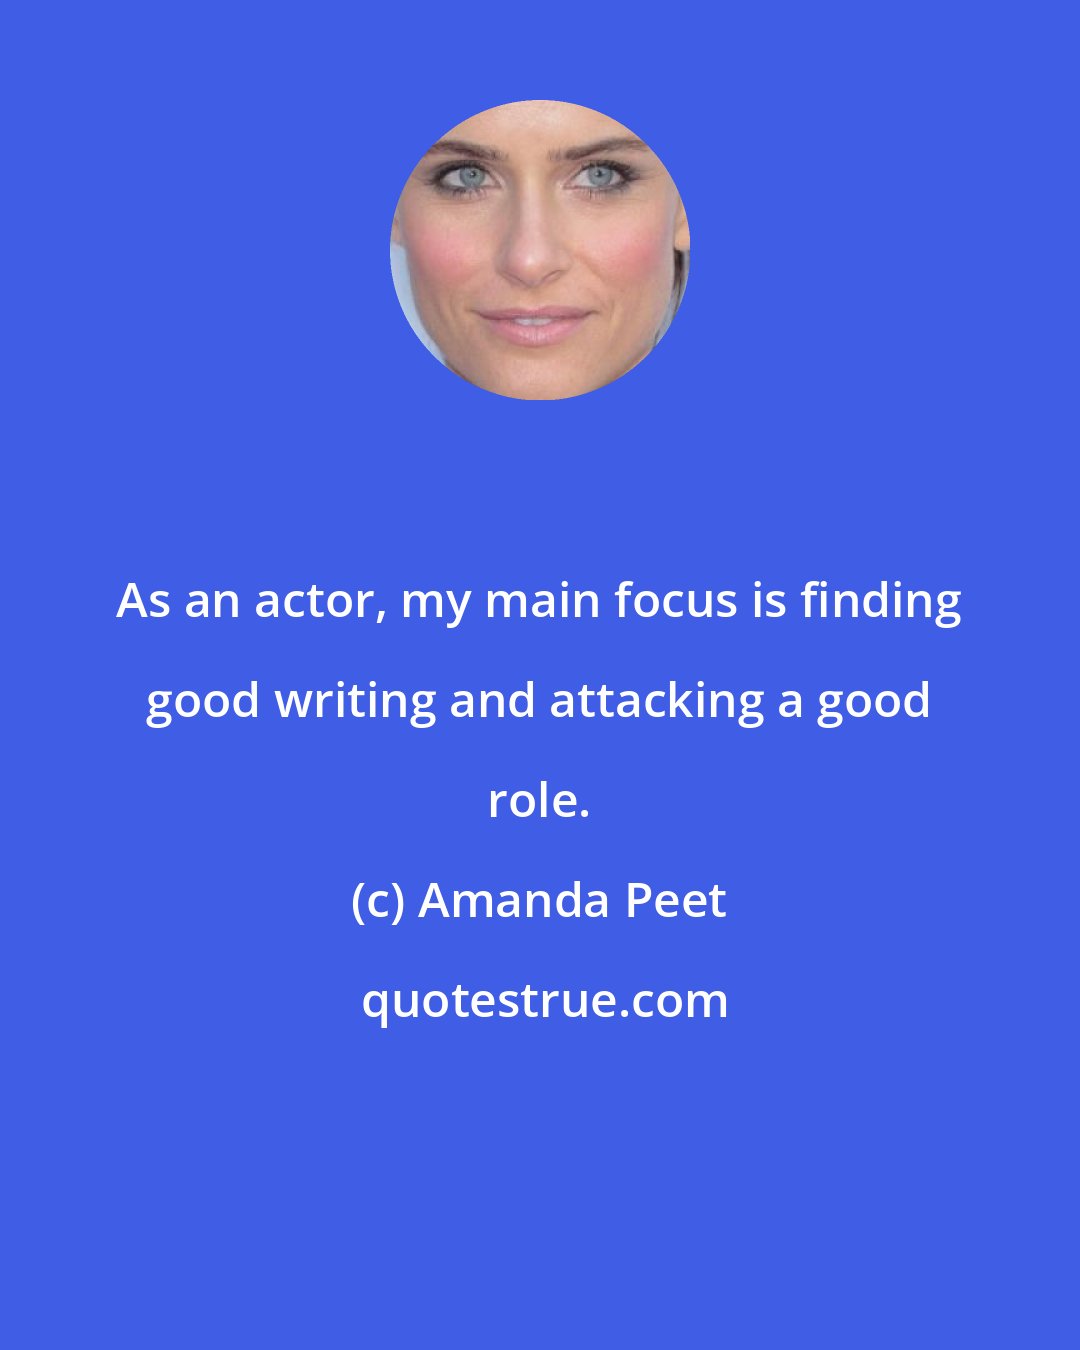 Amanda Peet: As an actor, my main focus is finding good writing and attacking a good role.